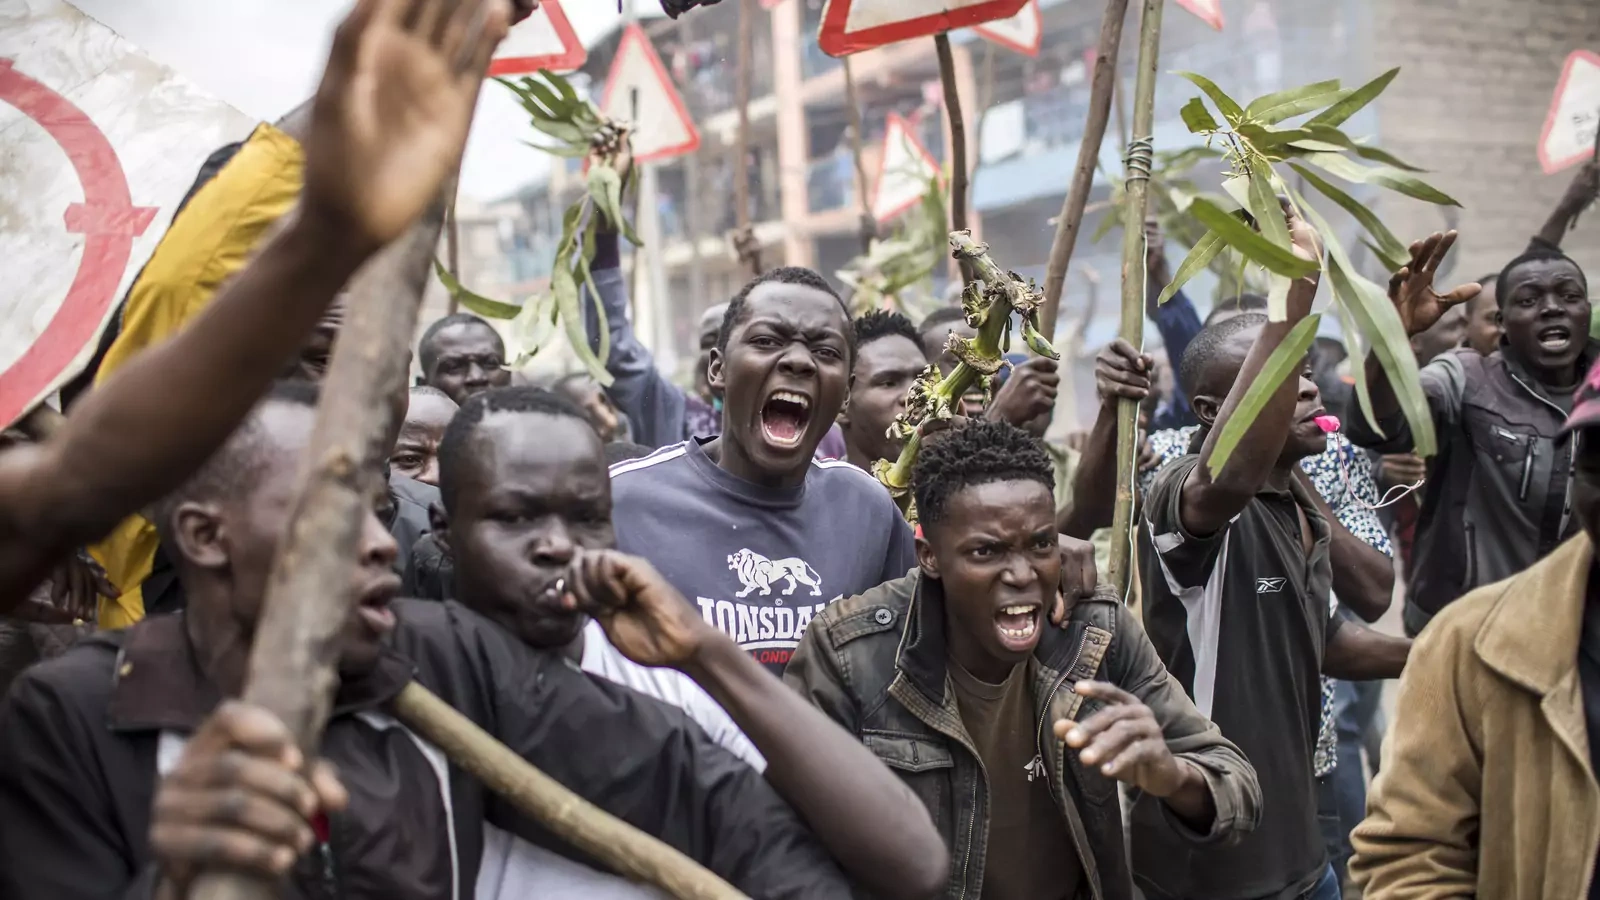 Supporters of Kenya's opposition presidential candidate Raila Odinga protest in Nairobi.